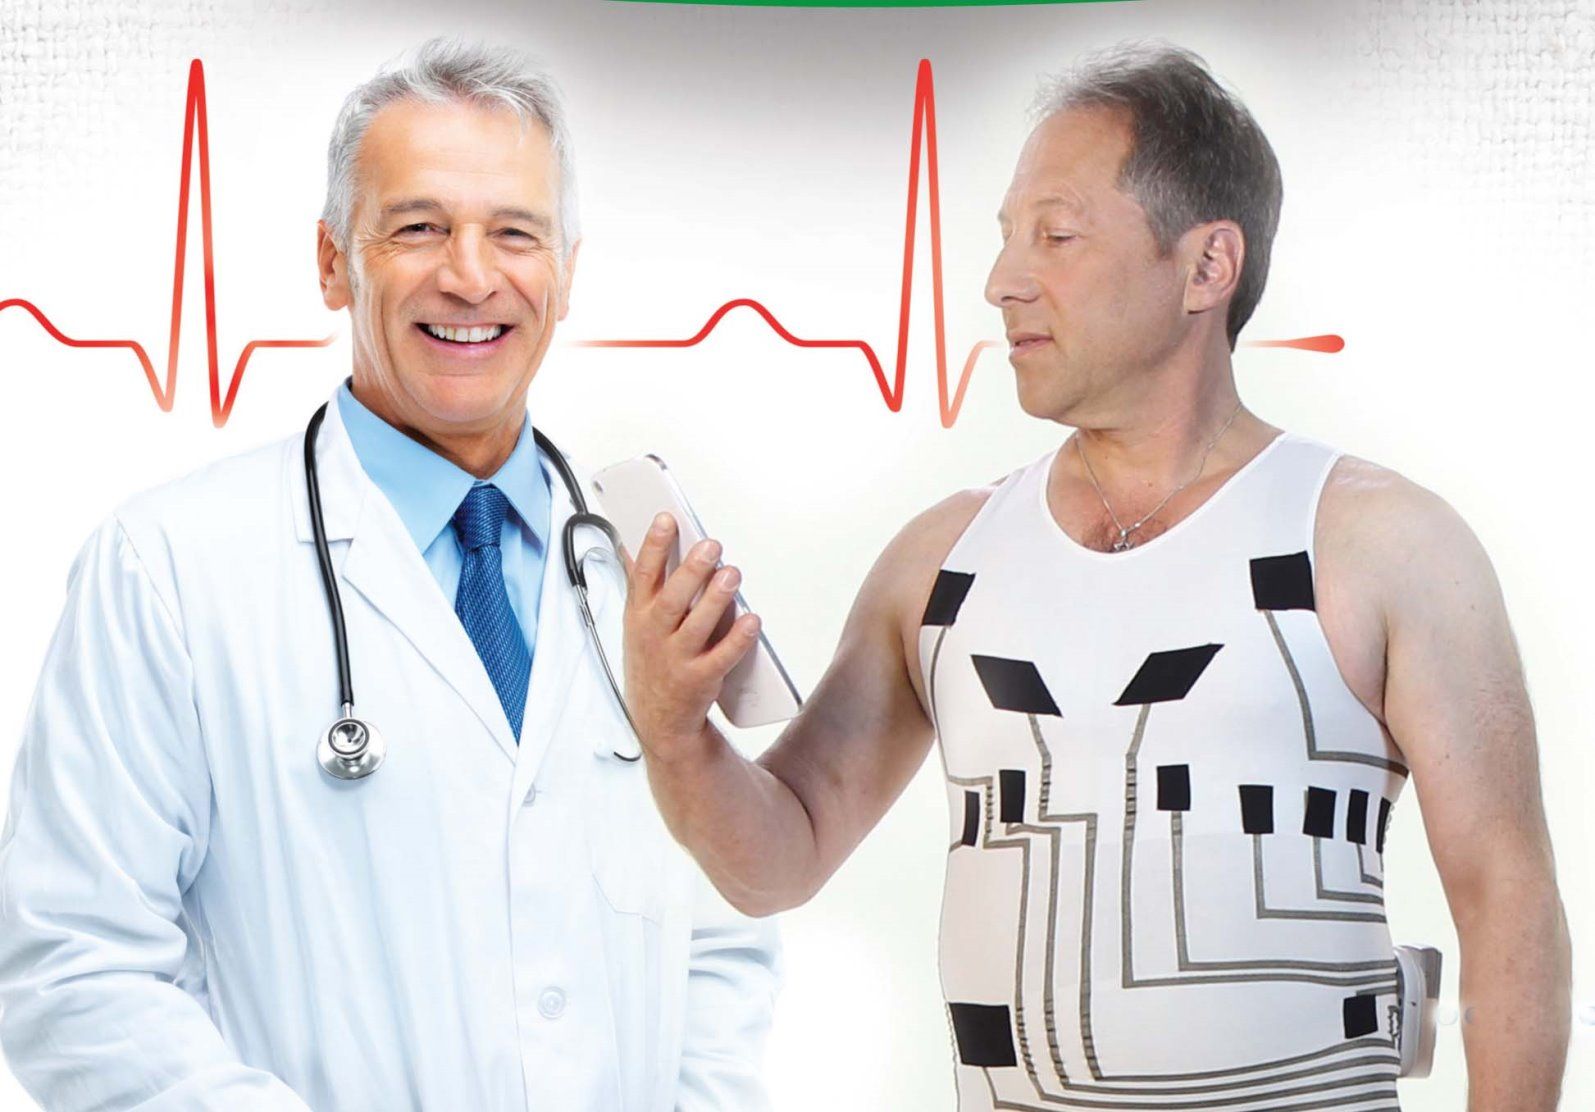 hWear shirts perform the job of an ECG and send results to your MD. Photo: courtesy